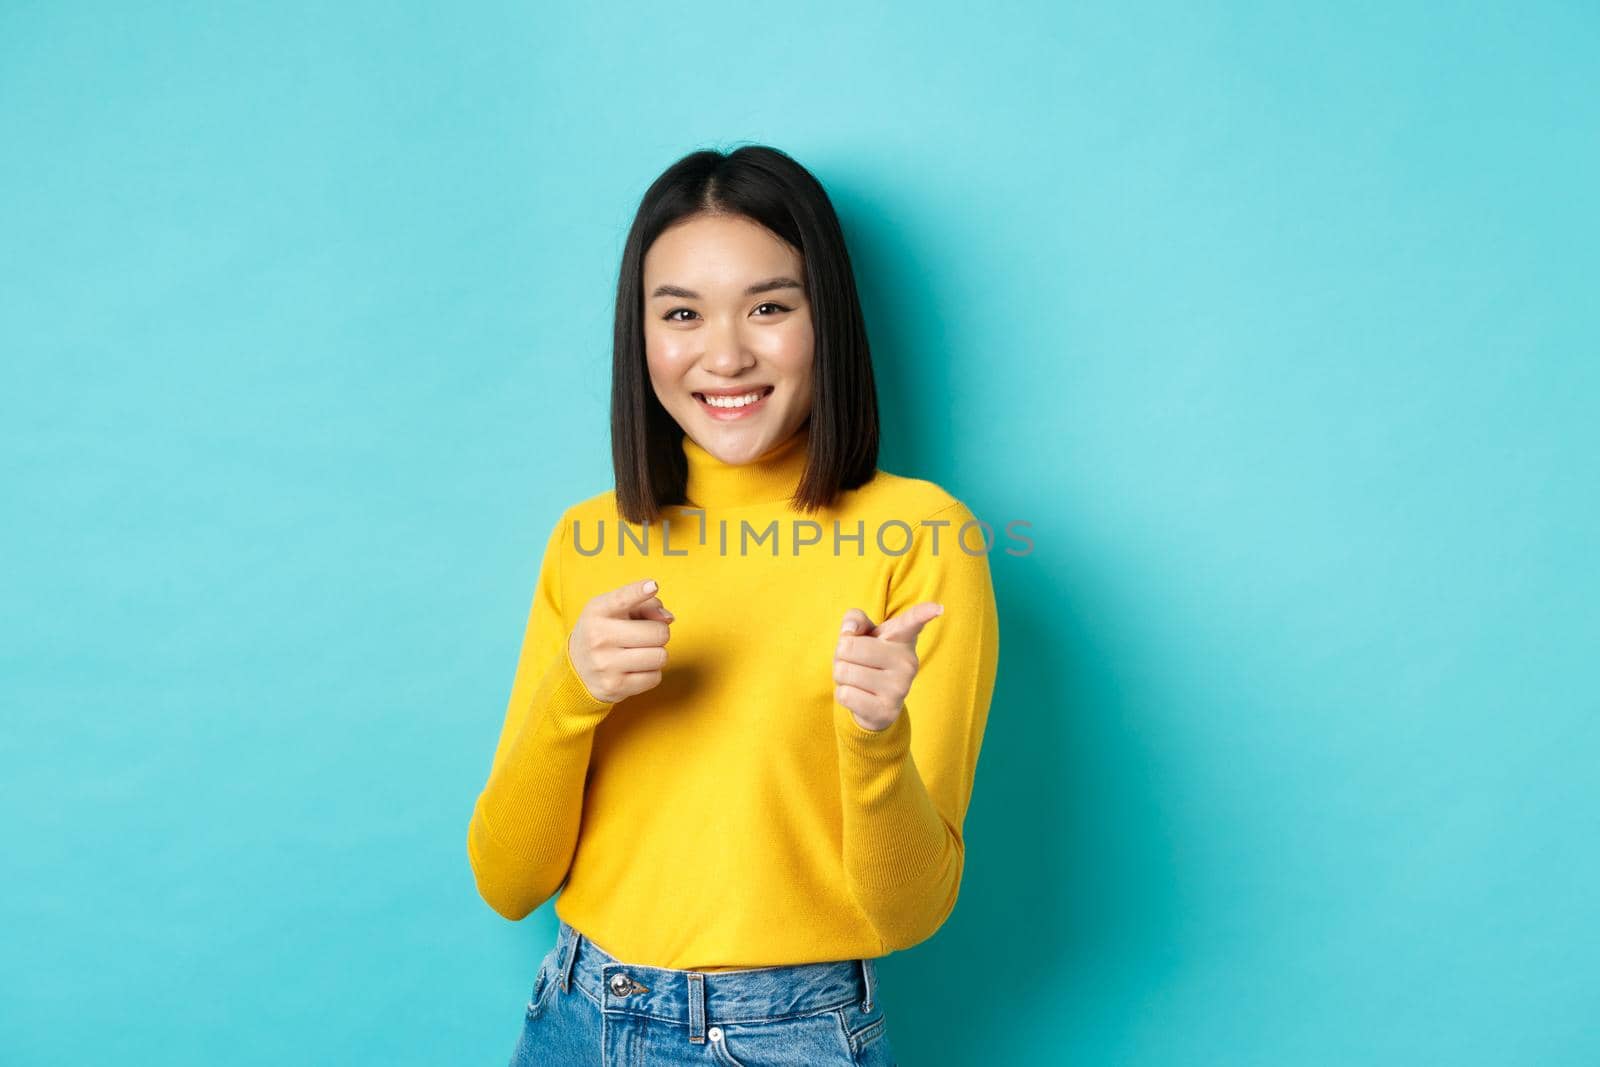 Smiling young asian woman pointing fingers at camera, choosing you, inviting to event, standing happy against blue background.